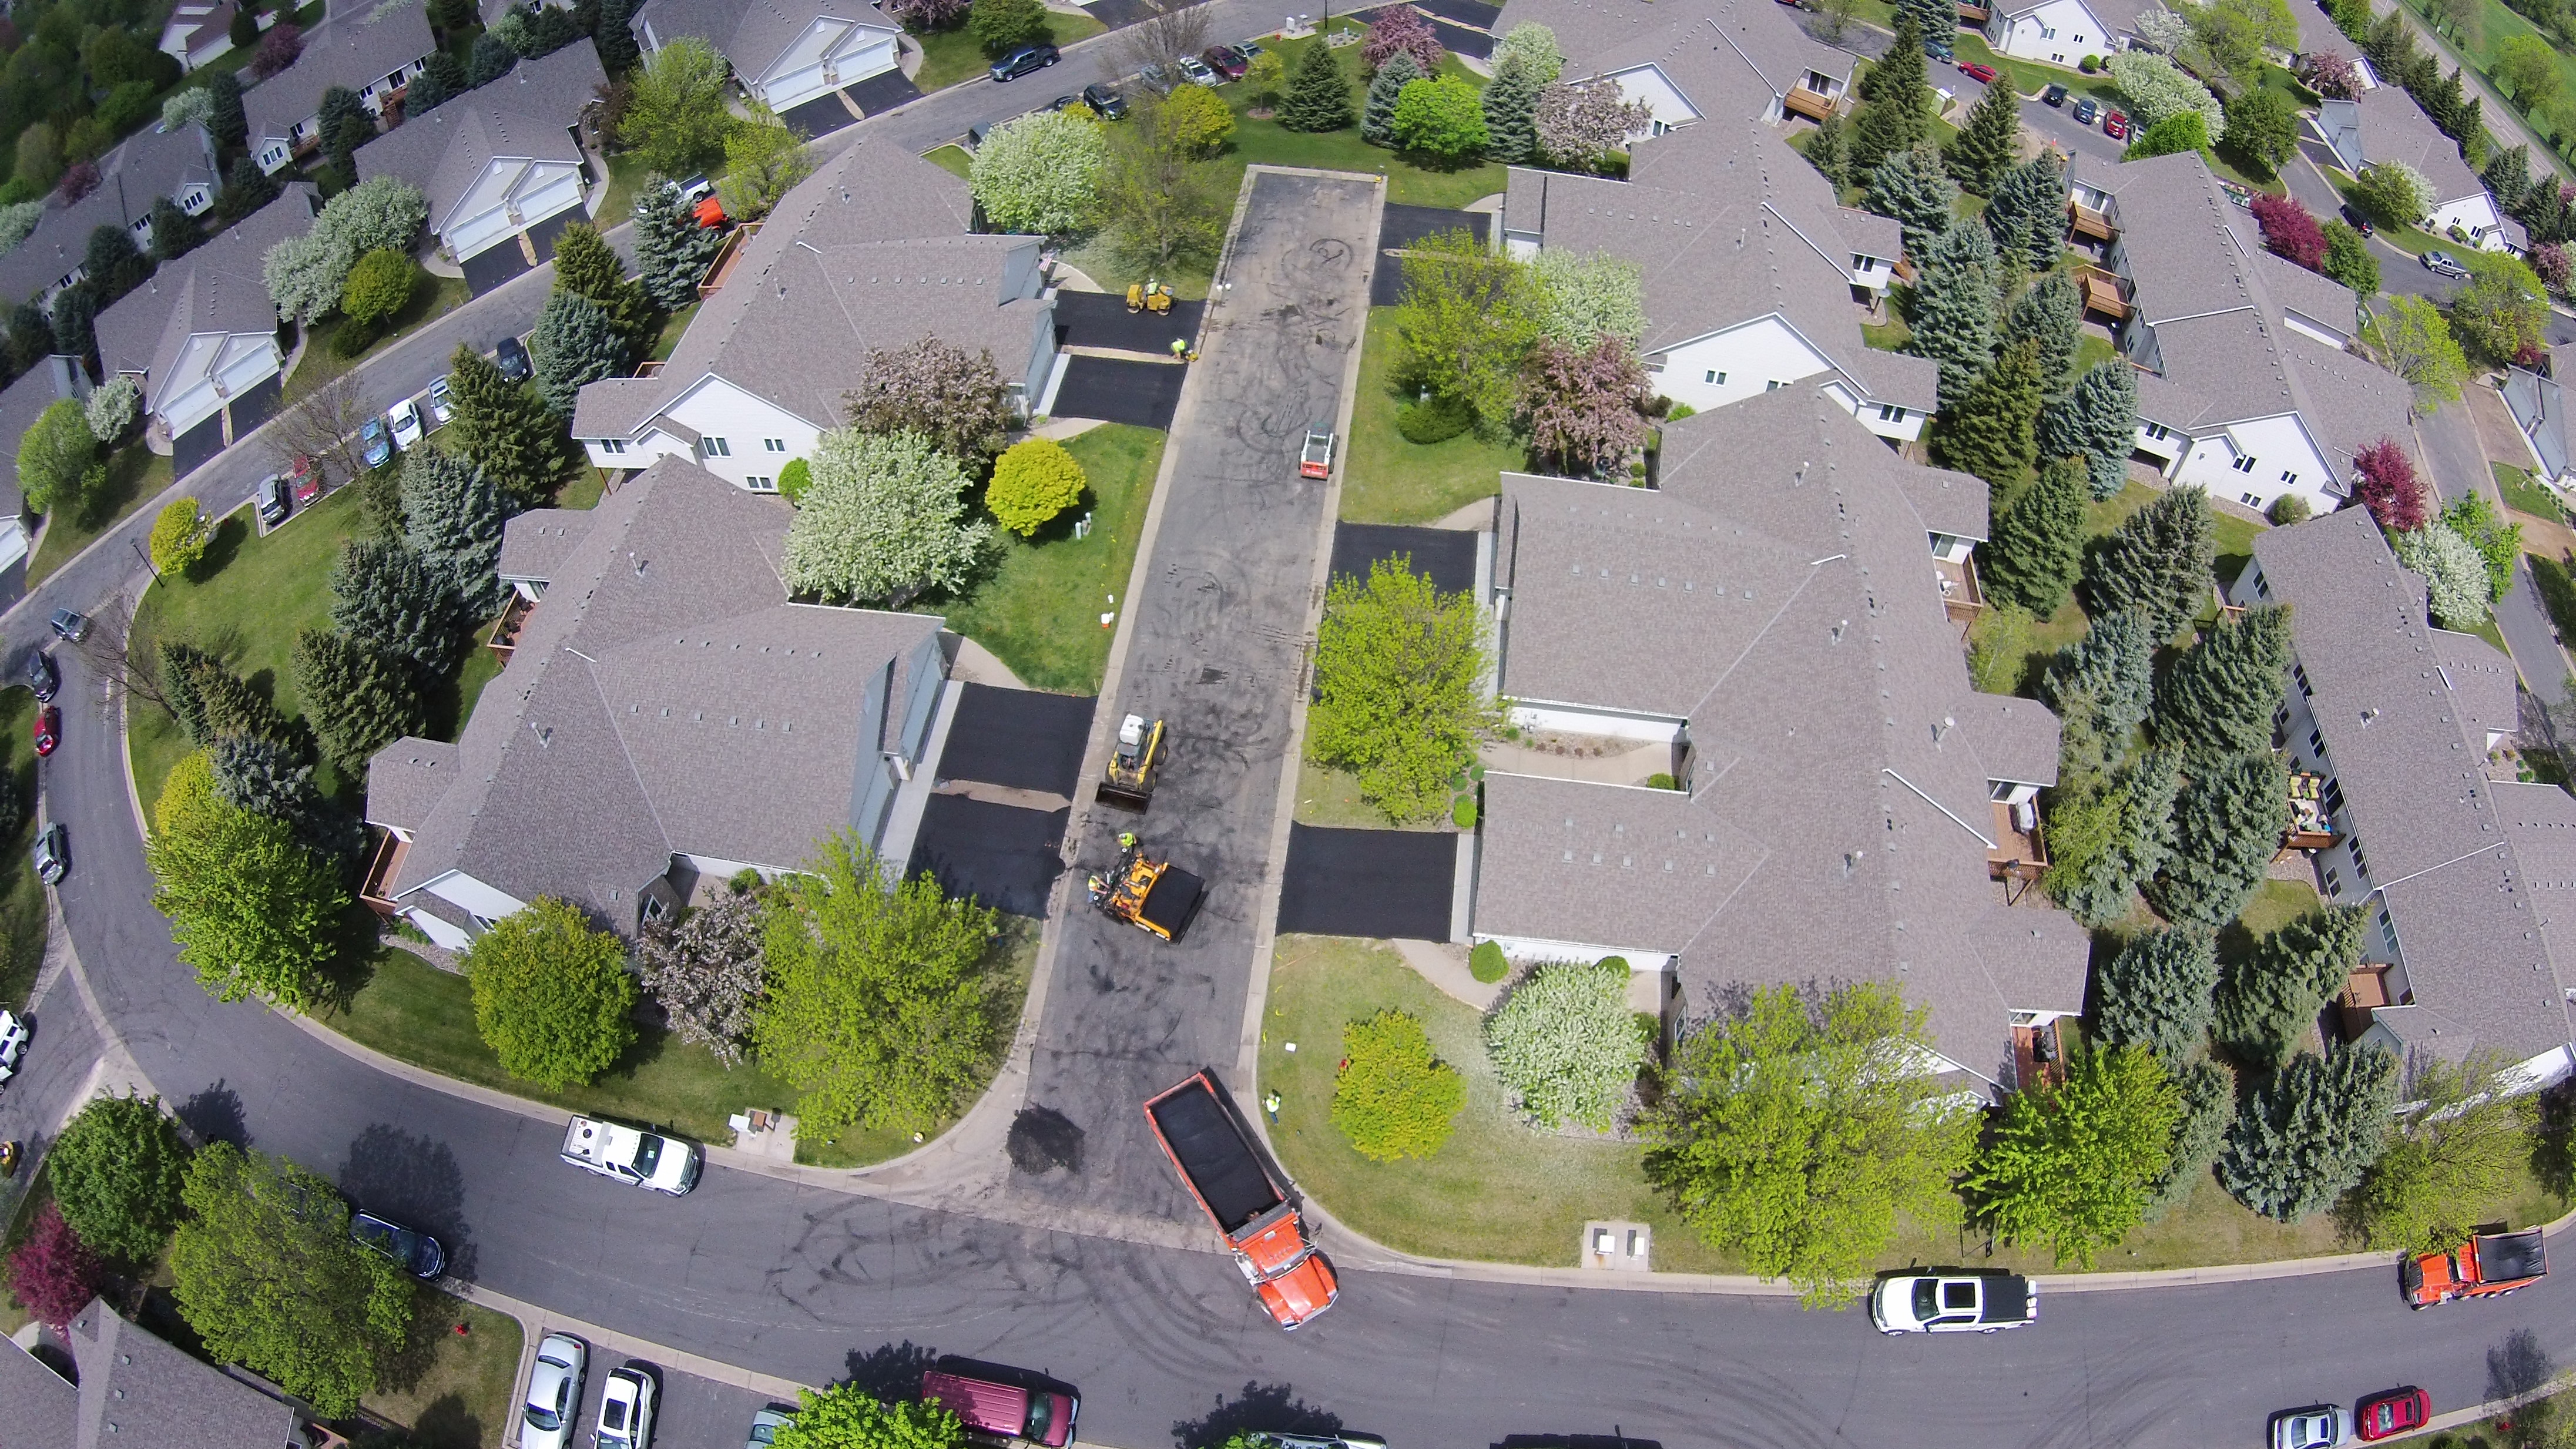 Townhome Paving